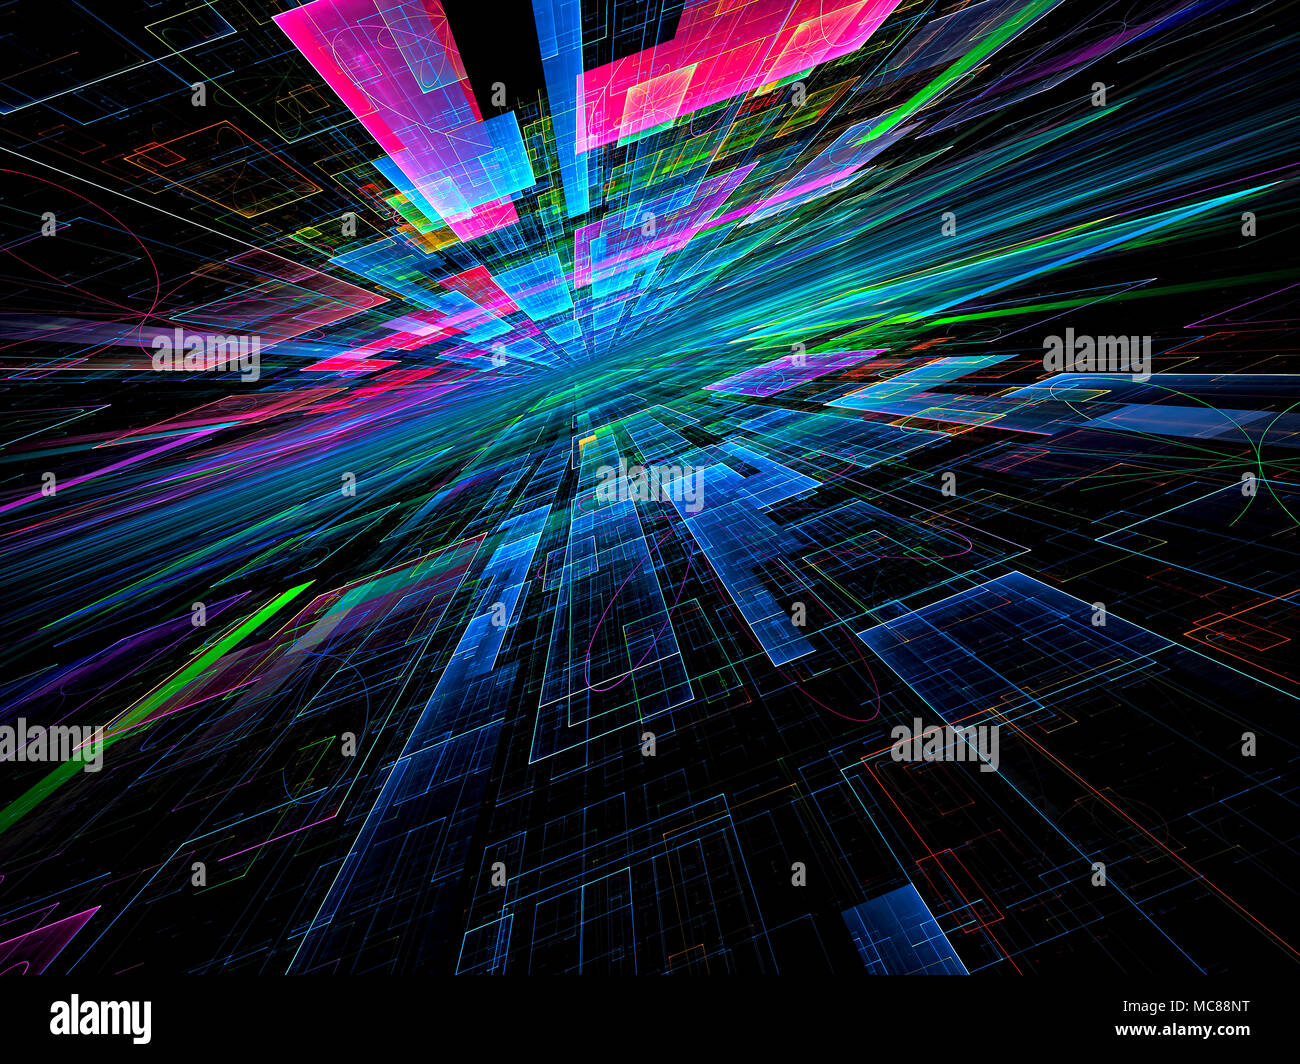 Colorful background for information technology or virtual reality design projects. Abstract computer-generated 3d illustration. Lines and rectangles t Stock Photo